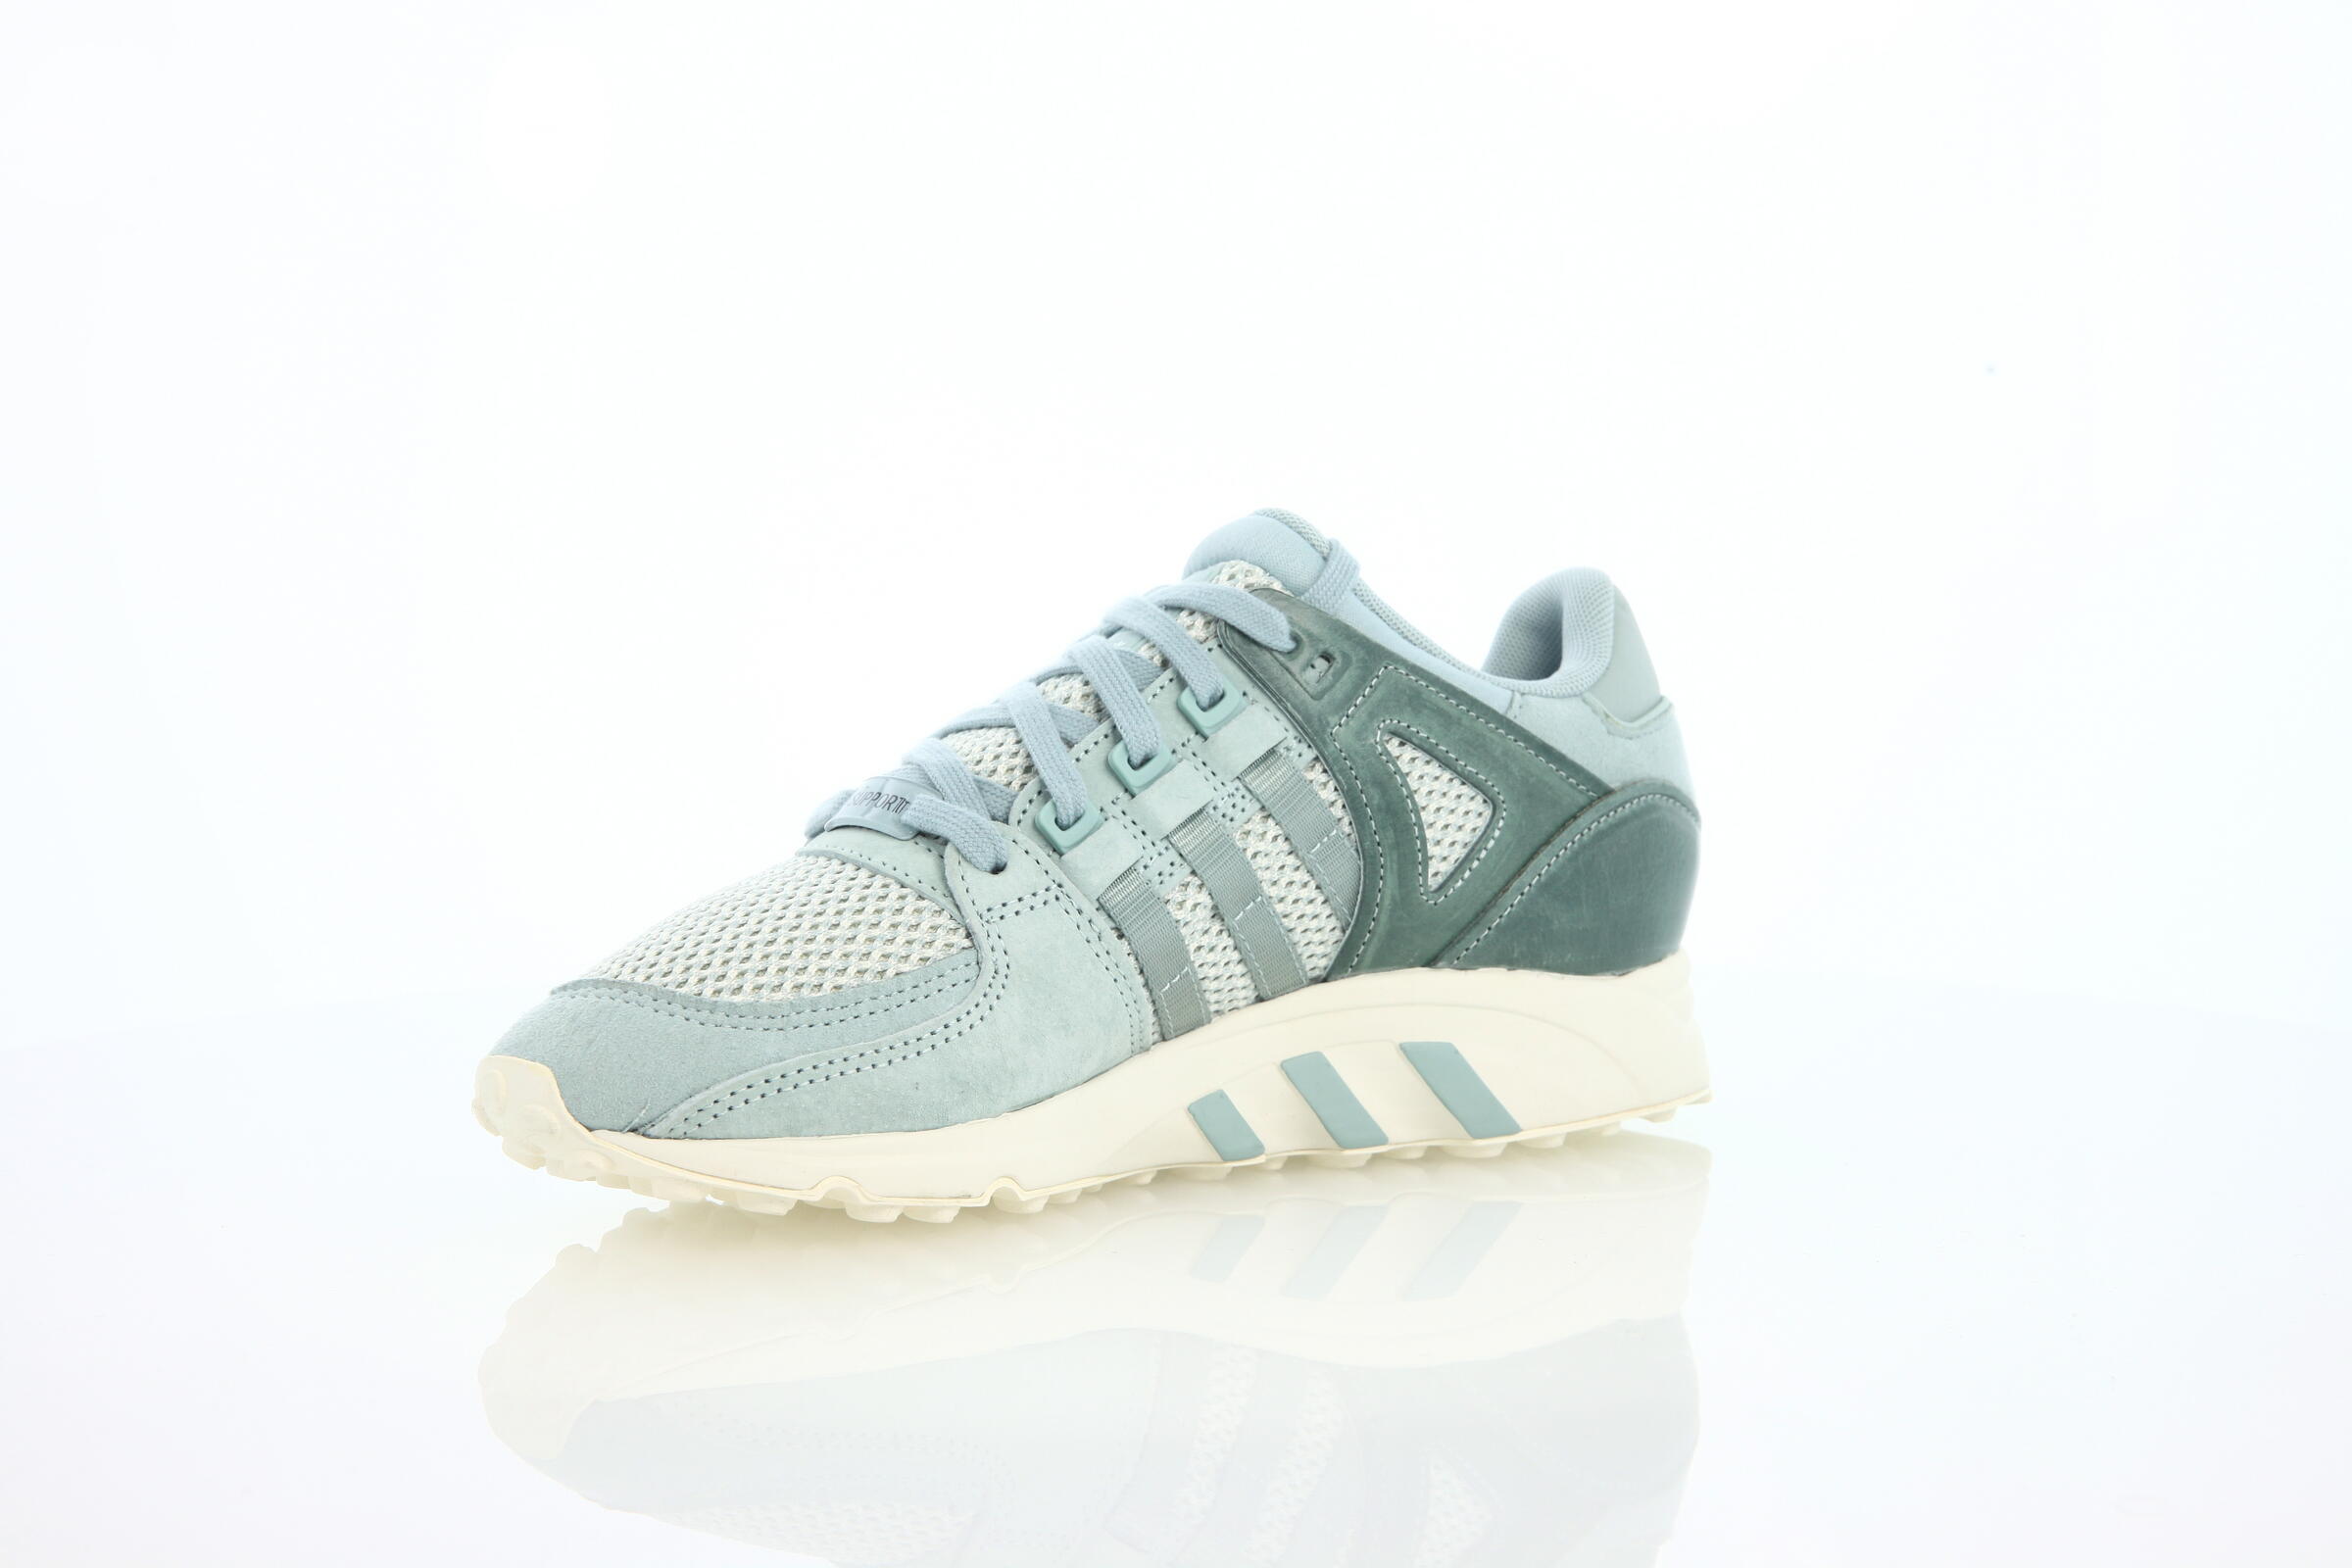 adidas Performance Equipment Support Rf W "Tactile Green"